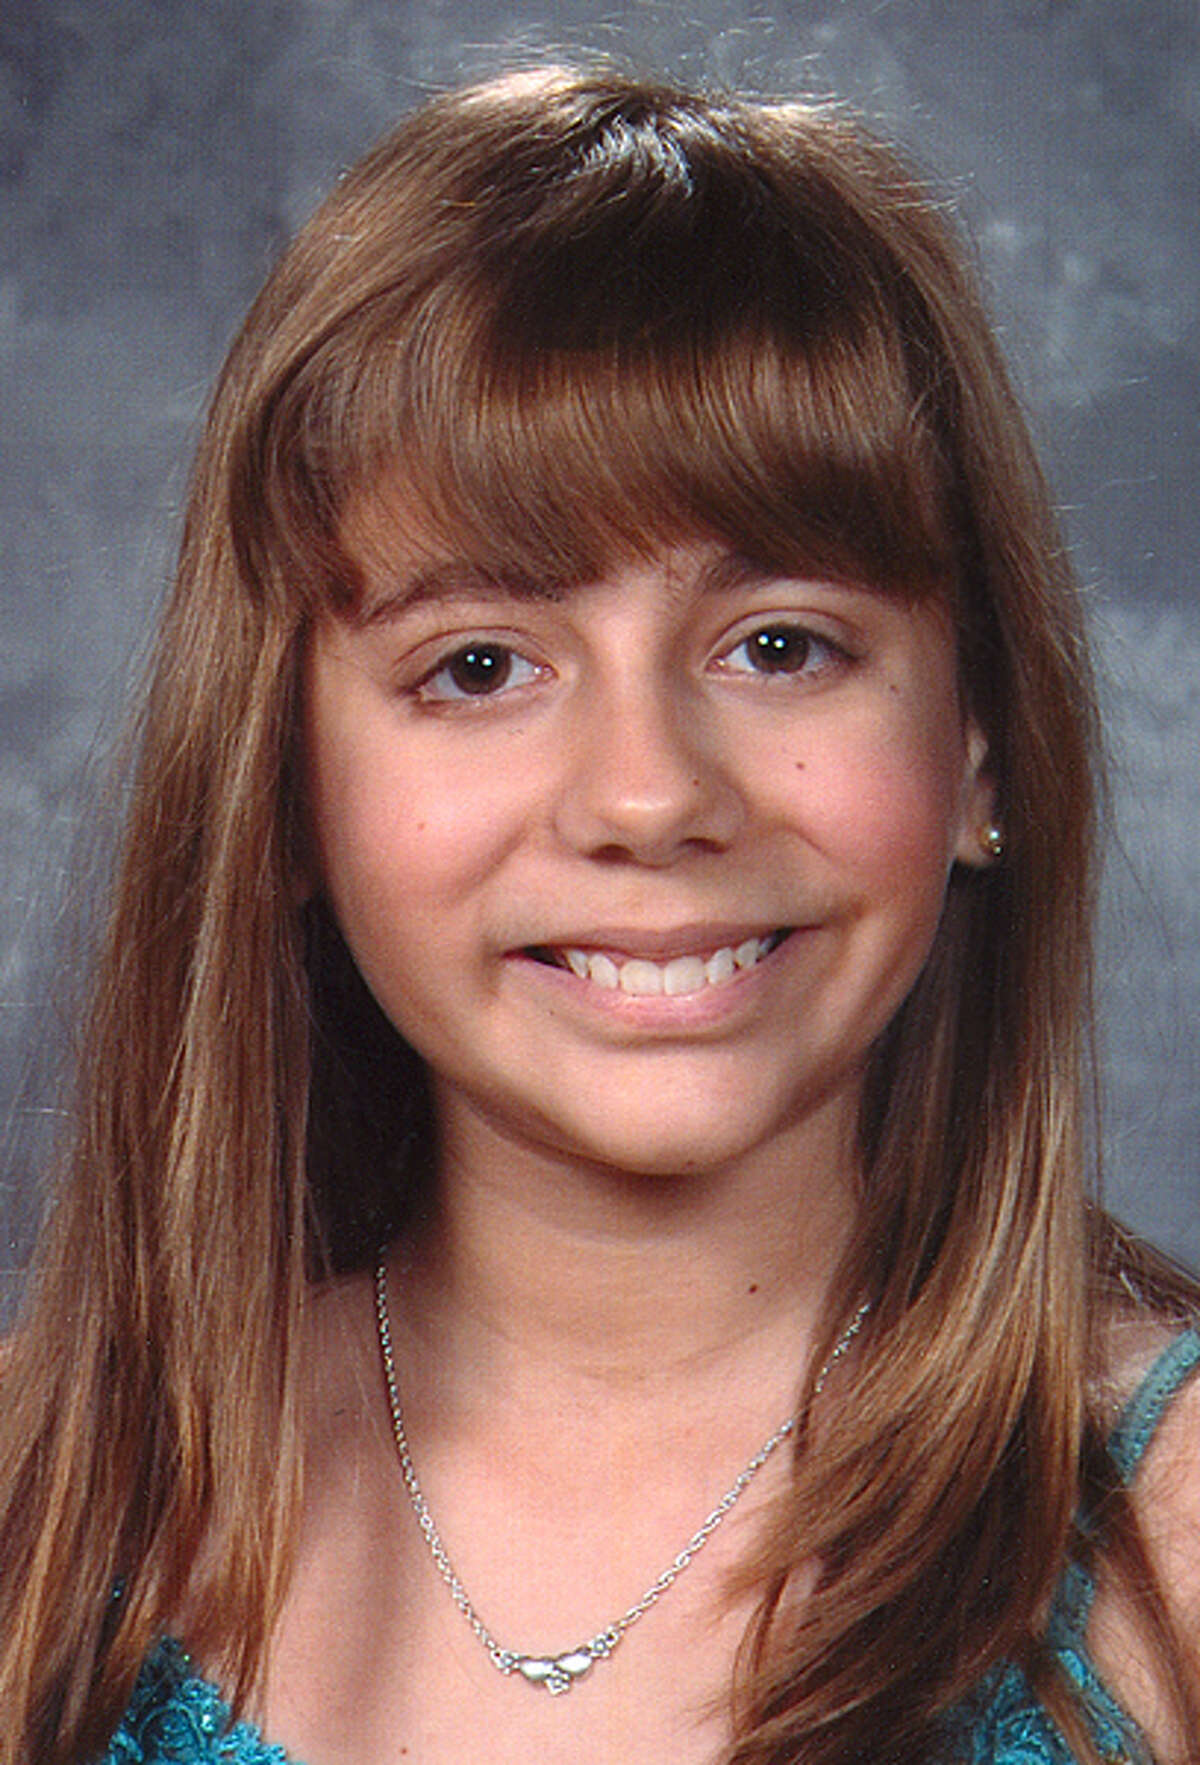 Francesca "Franki" Alexandra Casseb drowned Aug. 12, 2007, drowned in Lake Dunlap during an outing with her family.